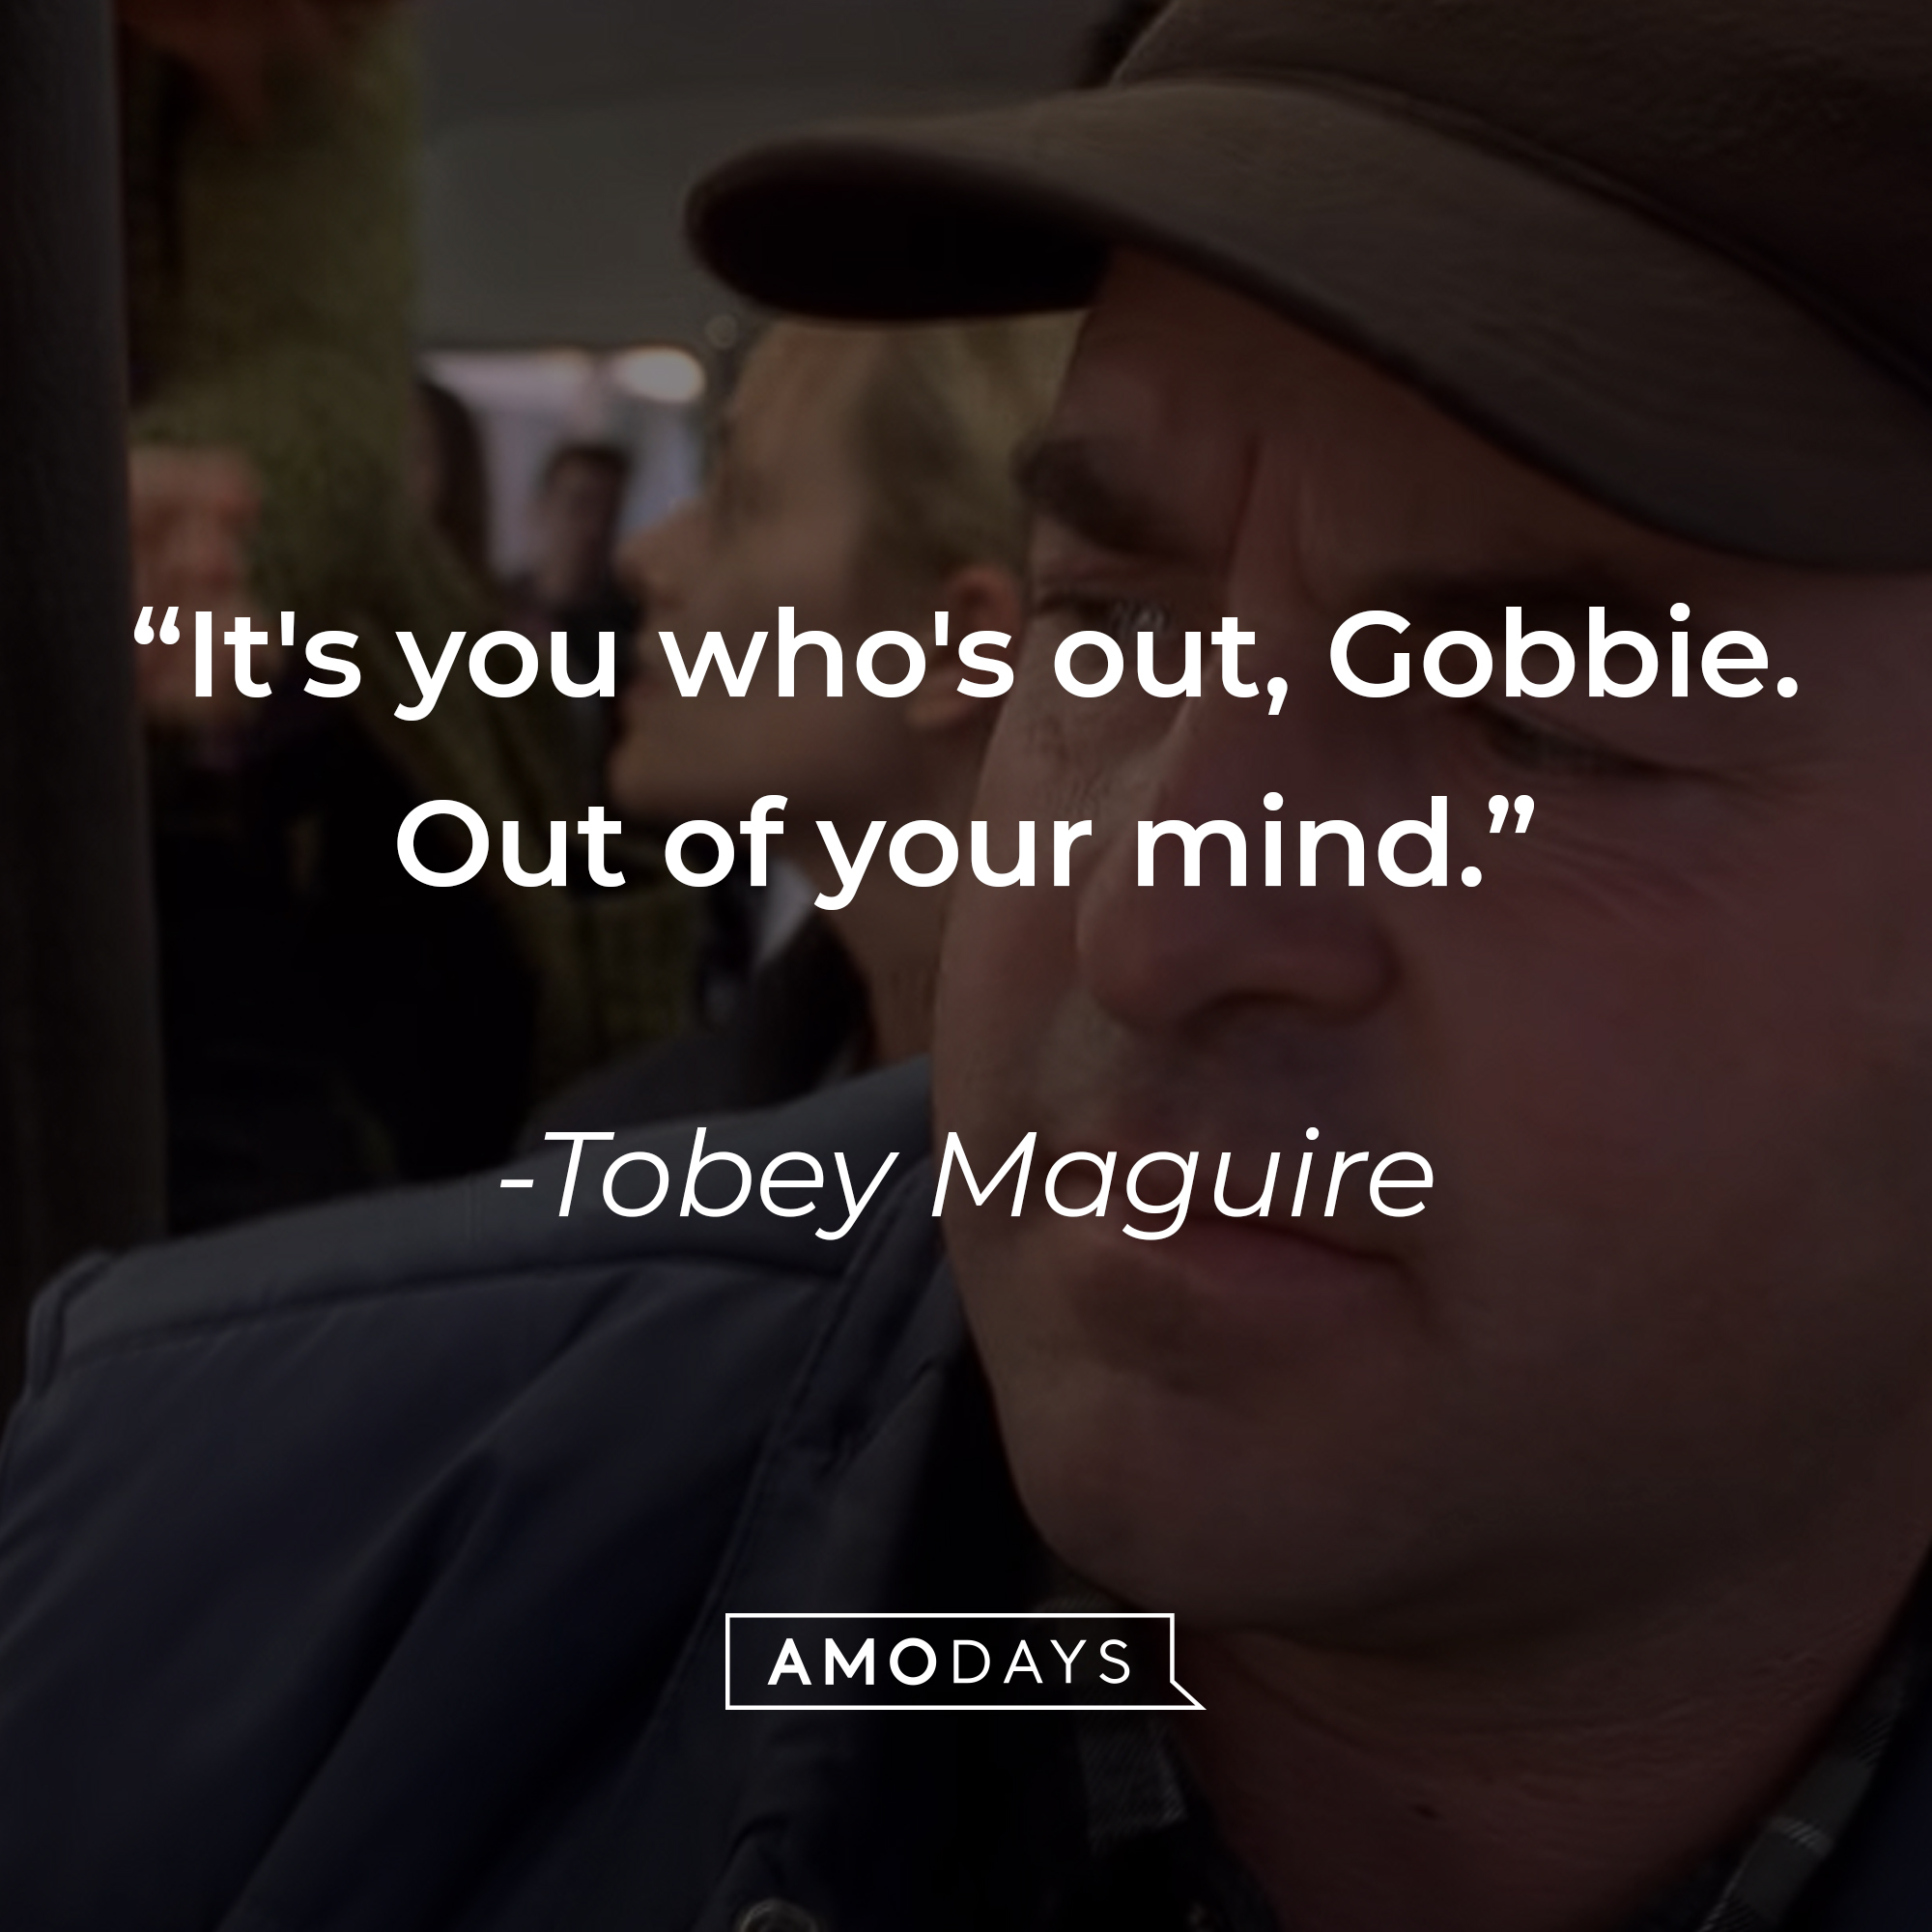 Tobey Maguire's quote: “It's you who's out, Gobbie. Out of your mind.” | Source: youtube.com/sonypictures